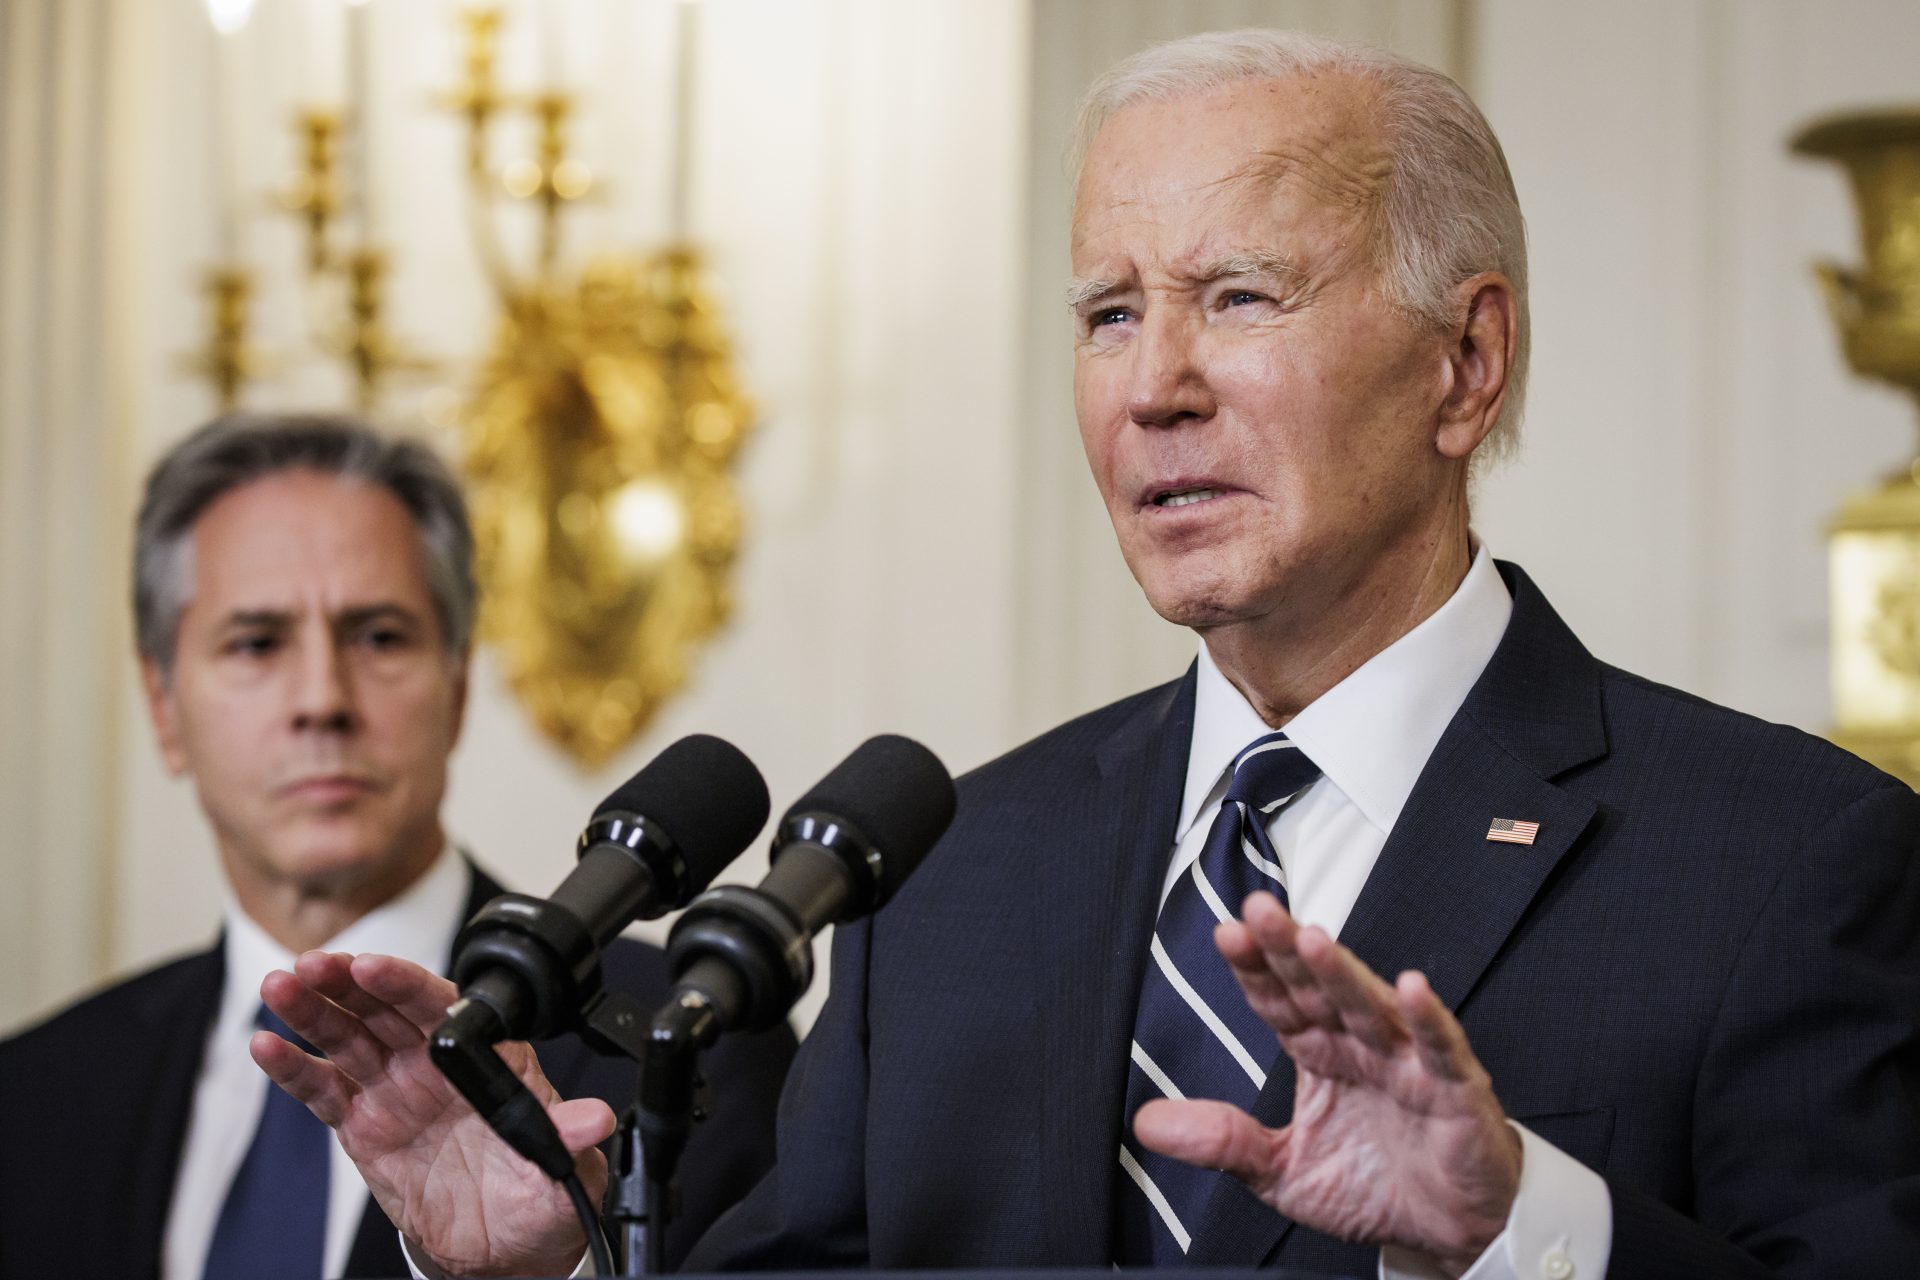 This is how Biden is responding to the crisis in Israel